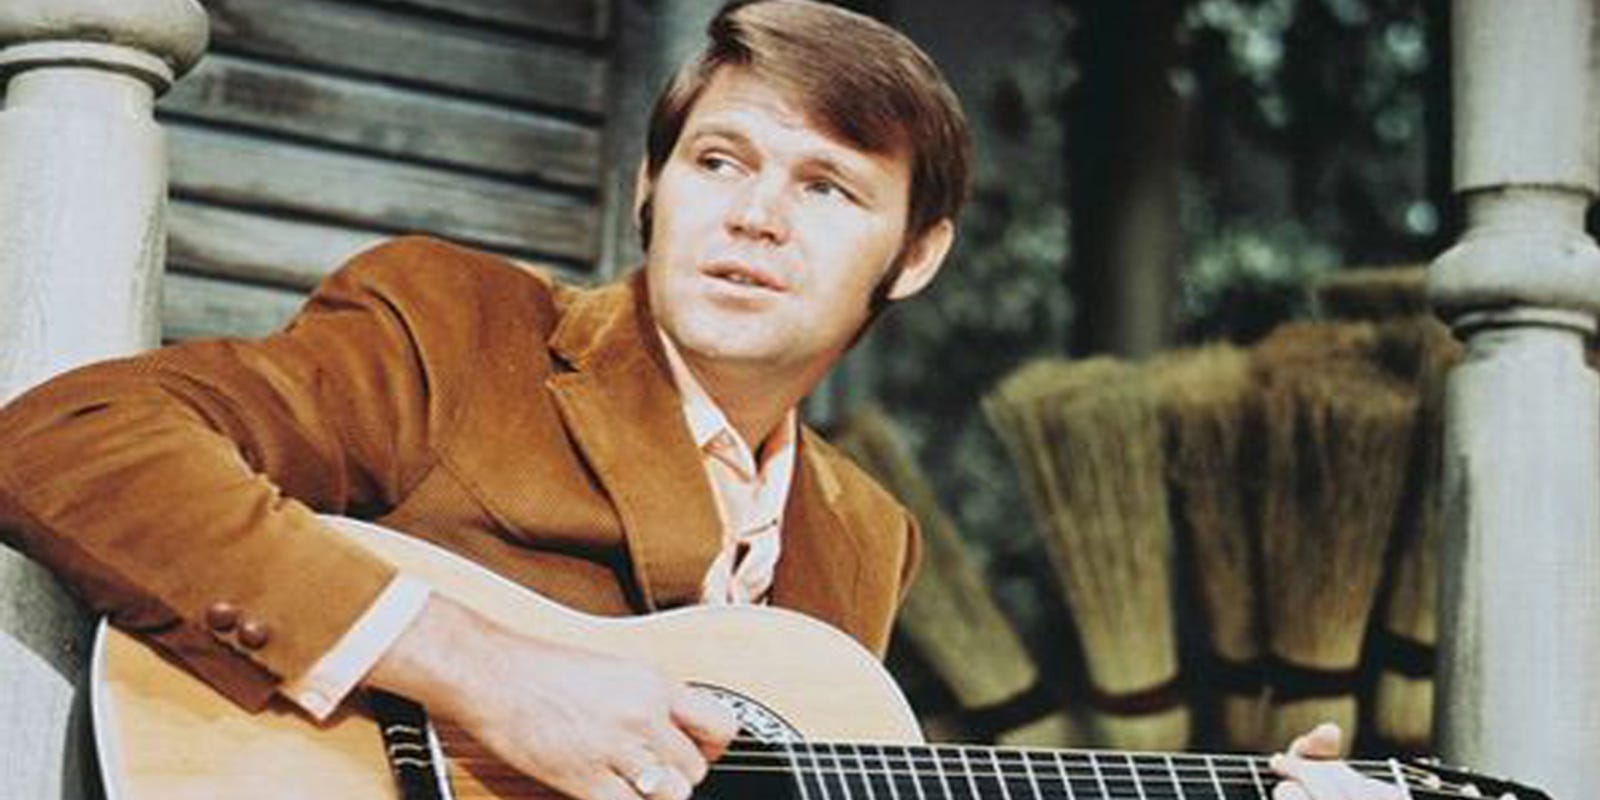 Glen Campbell has died at 81